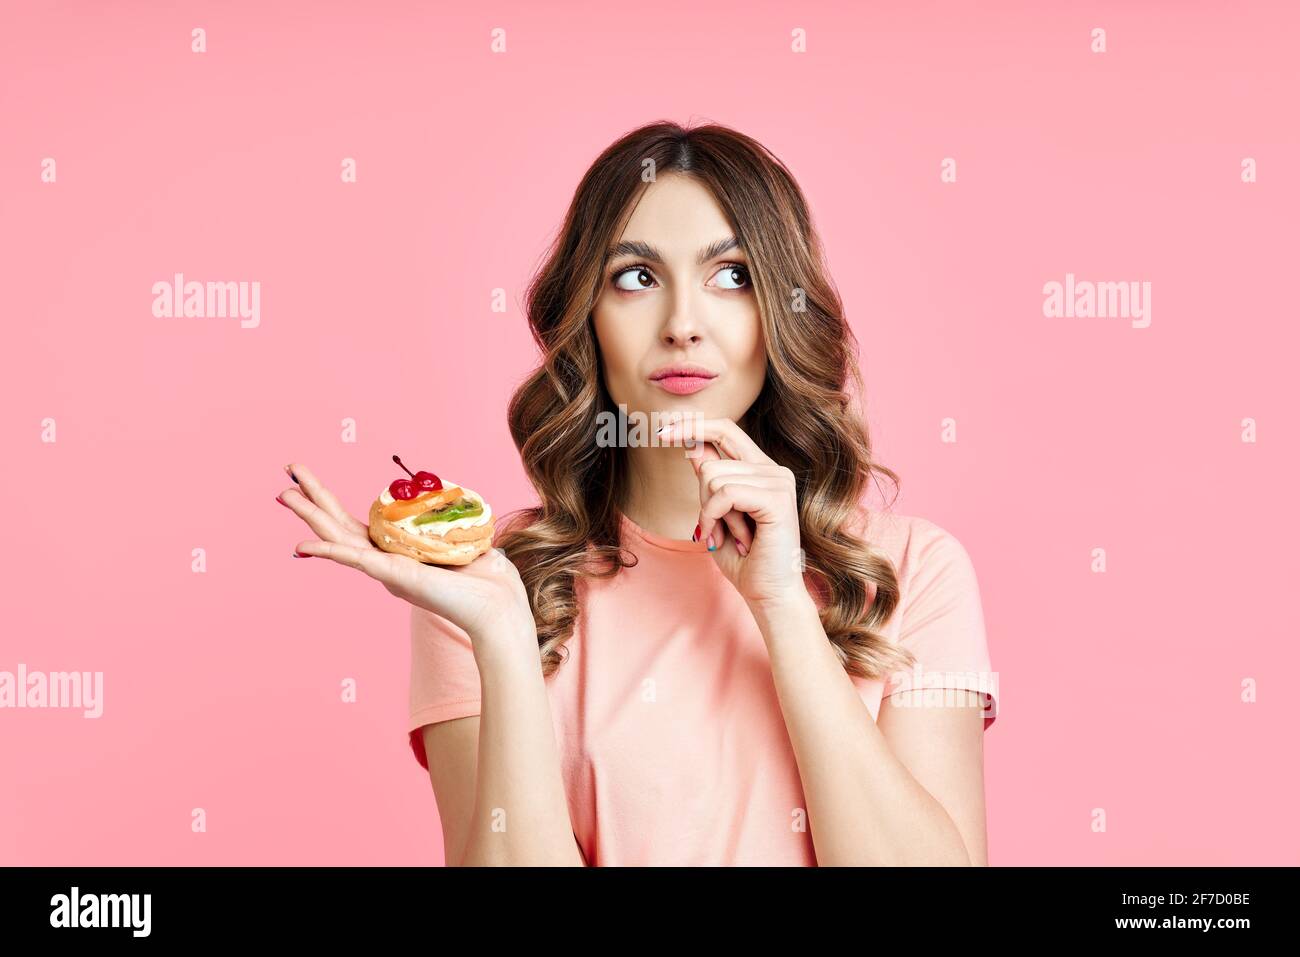 Dieting concept. Confused pretty woman looking up holding pastry cake in hand on pink background. Weight Loss Stock Photo